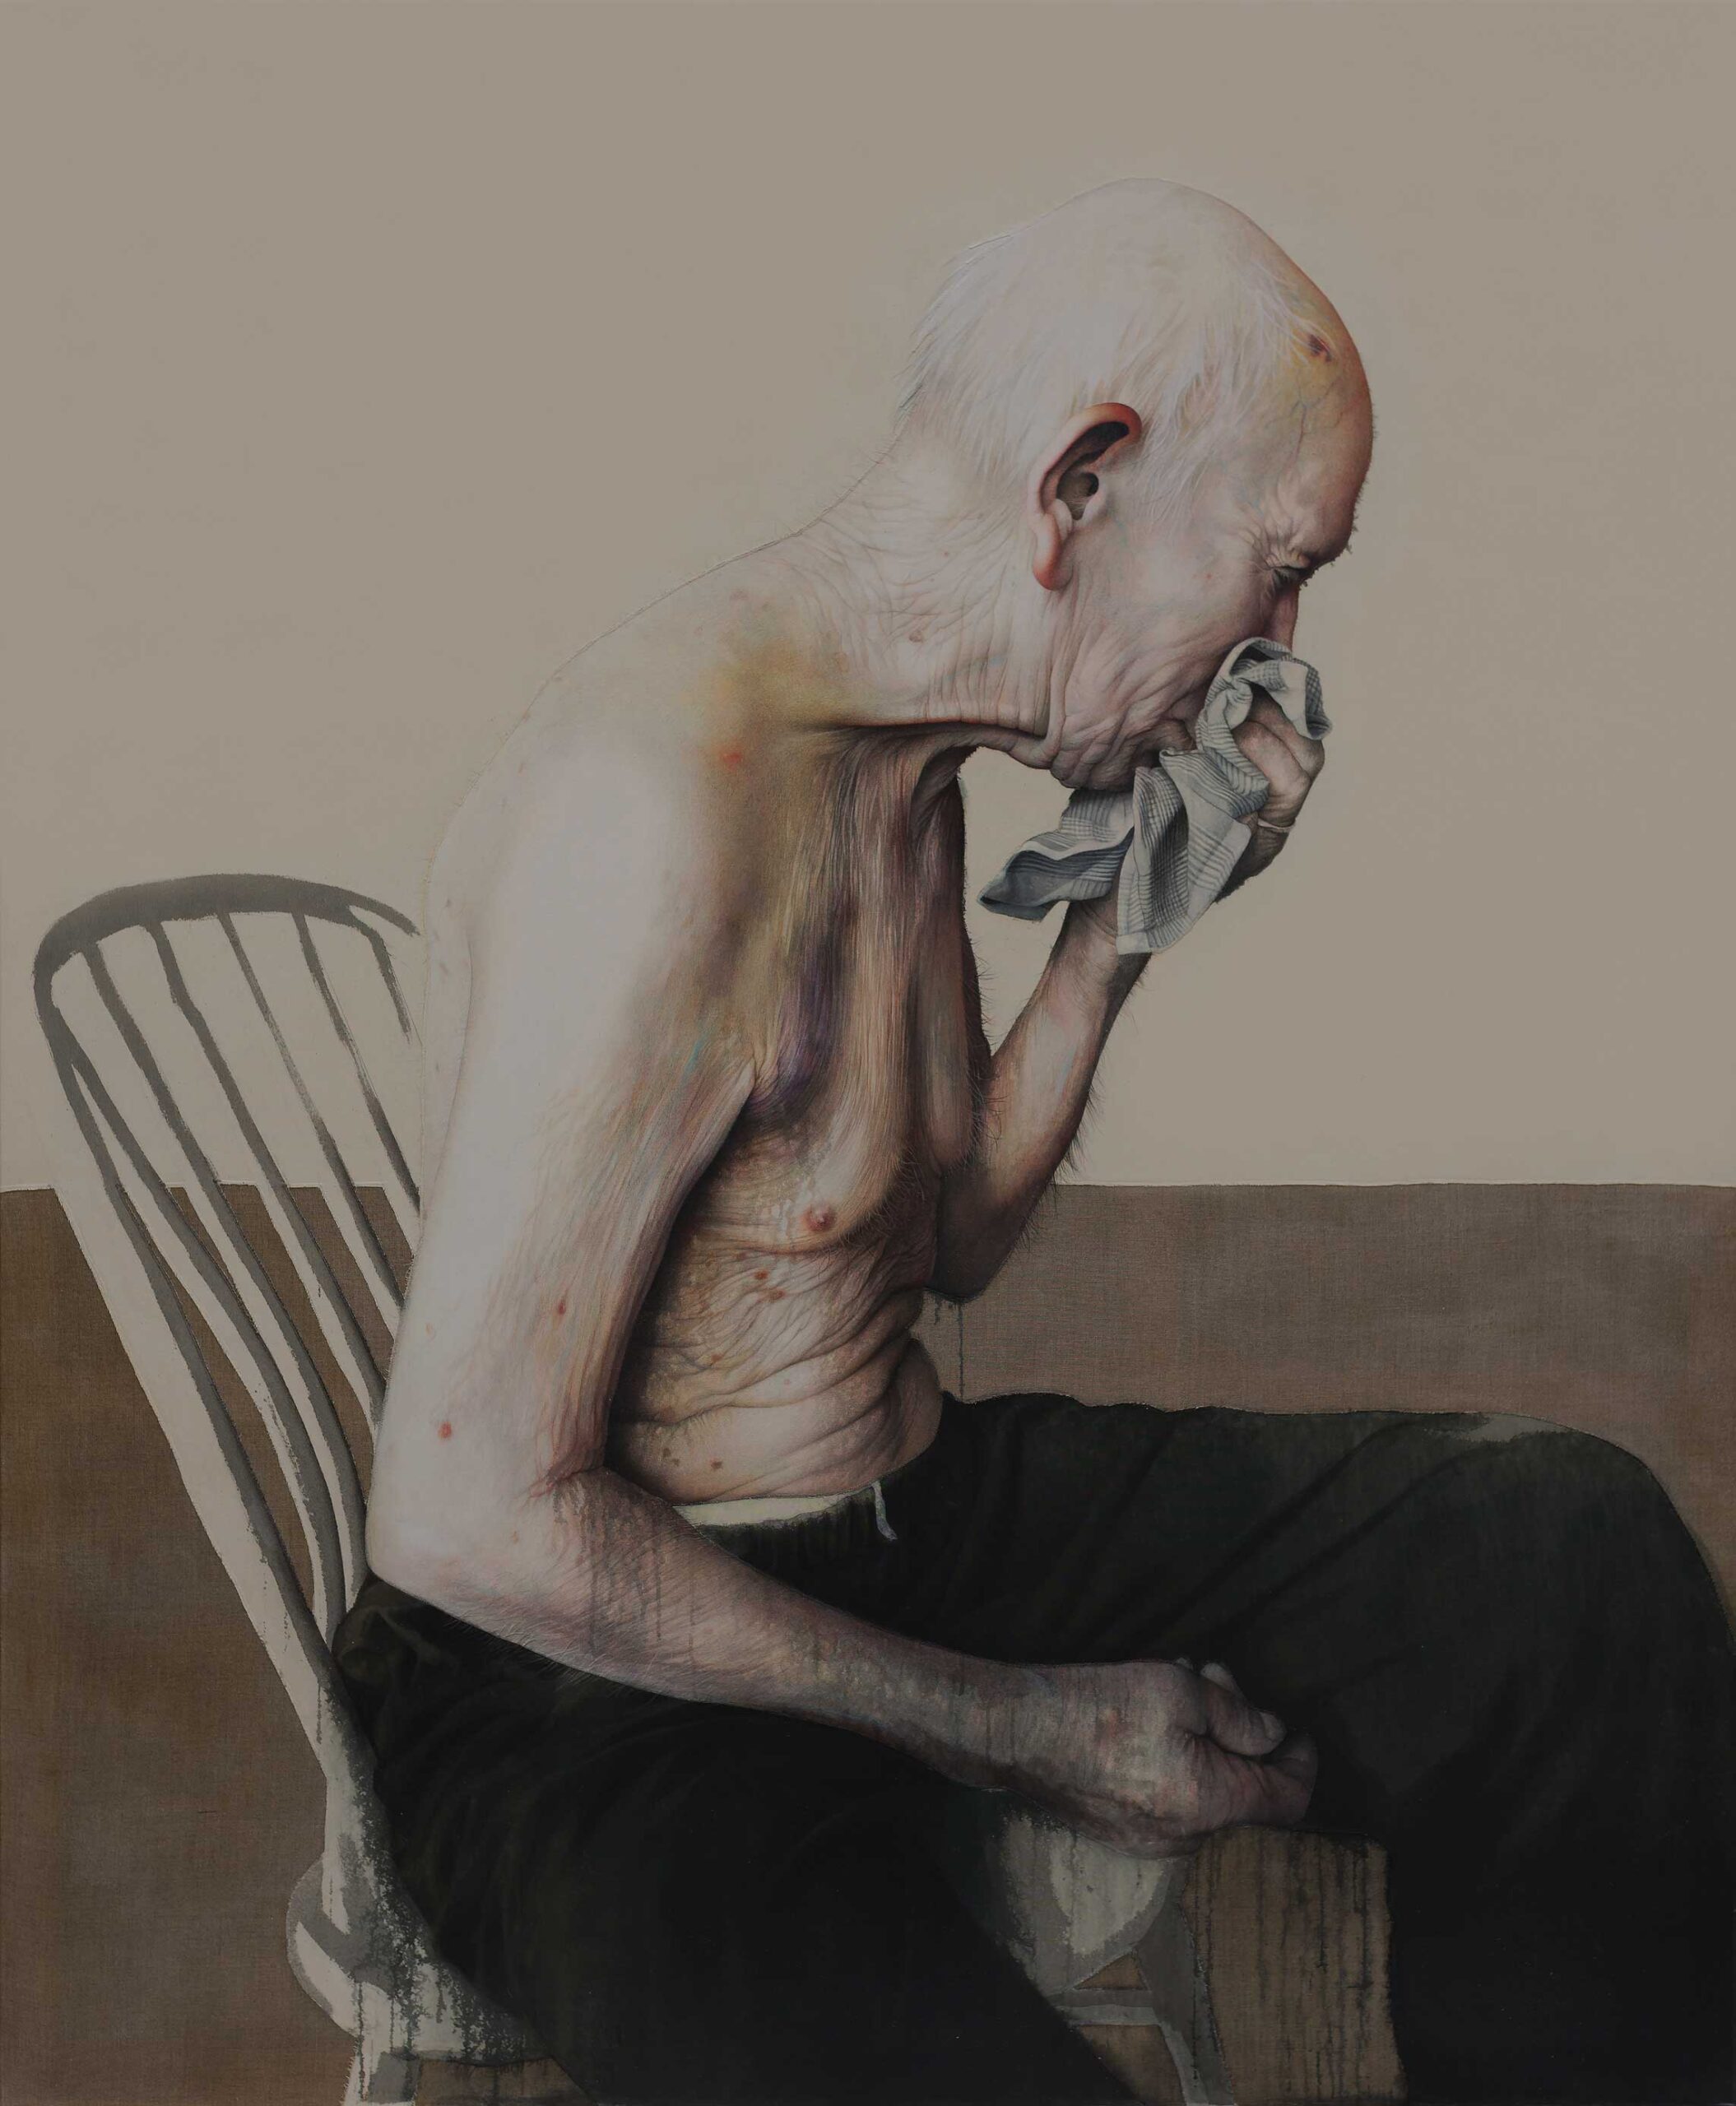 Annemarie Busschers, "Aging," 2015, acrylic, pencil, and cotton on linen, 86 1/2 x 78 3/4 in., collection Van Lanschot Bank, Amsterdam